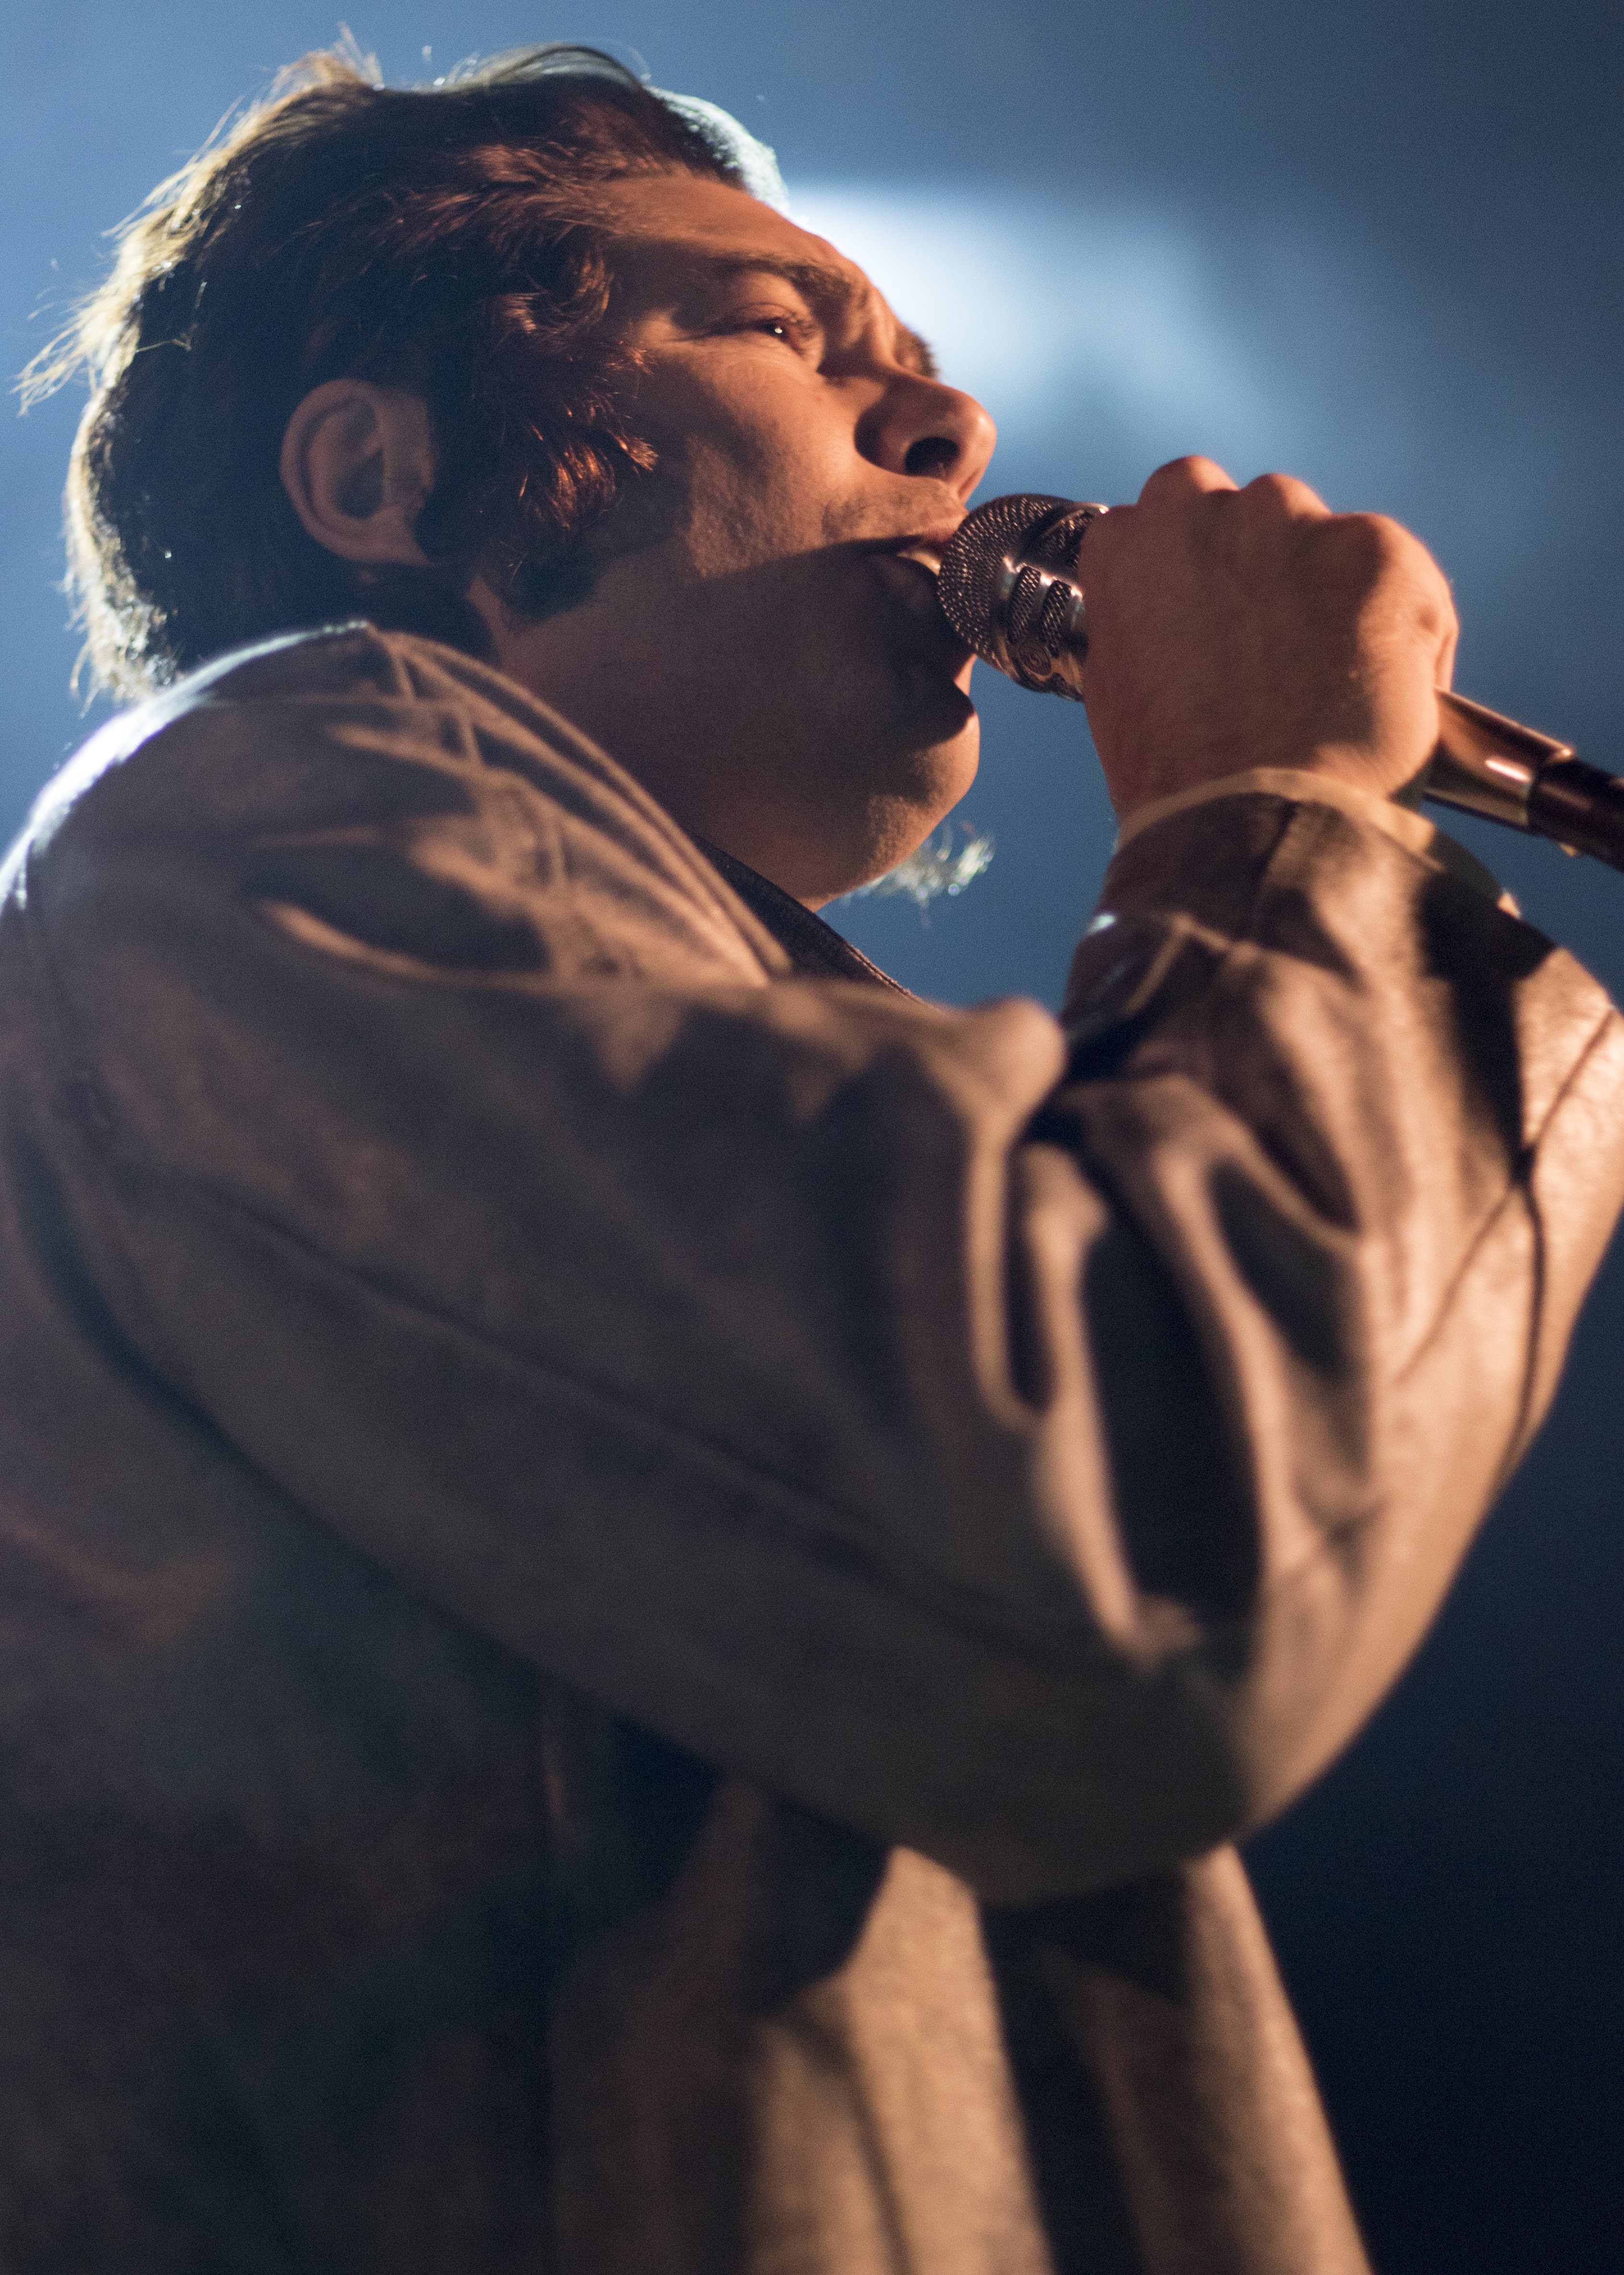 Concert review: The Growlers at Boulder Theater